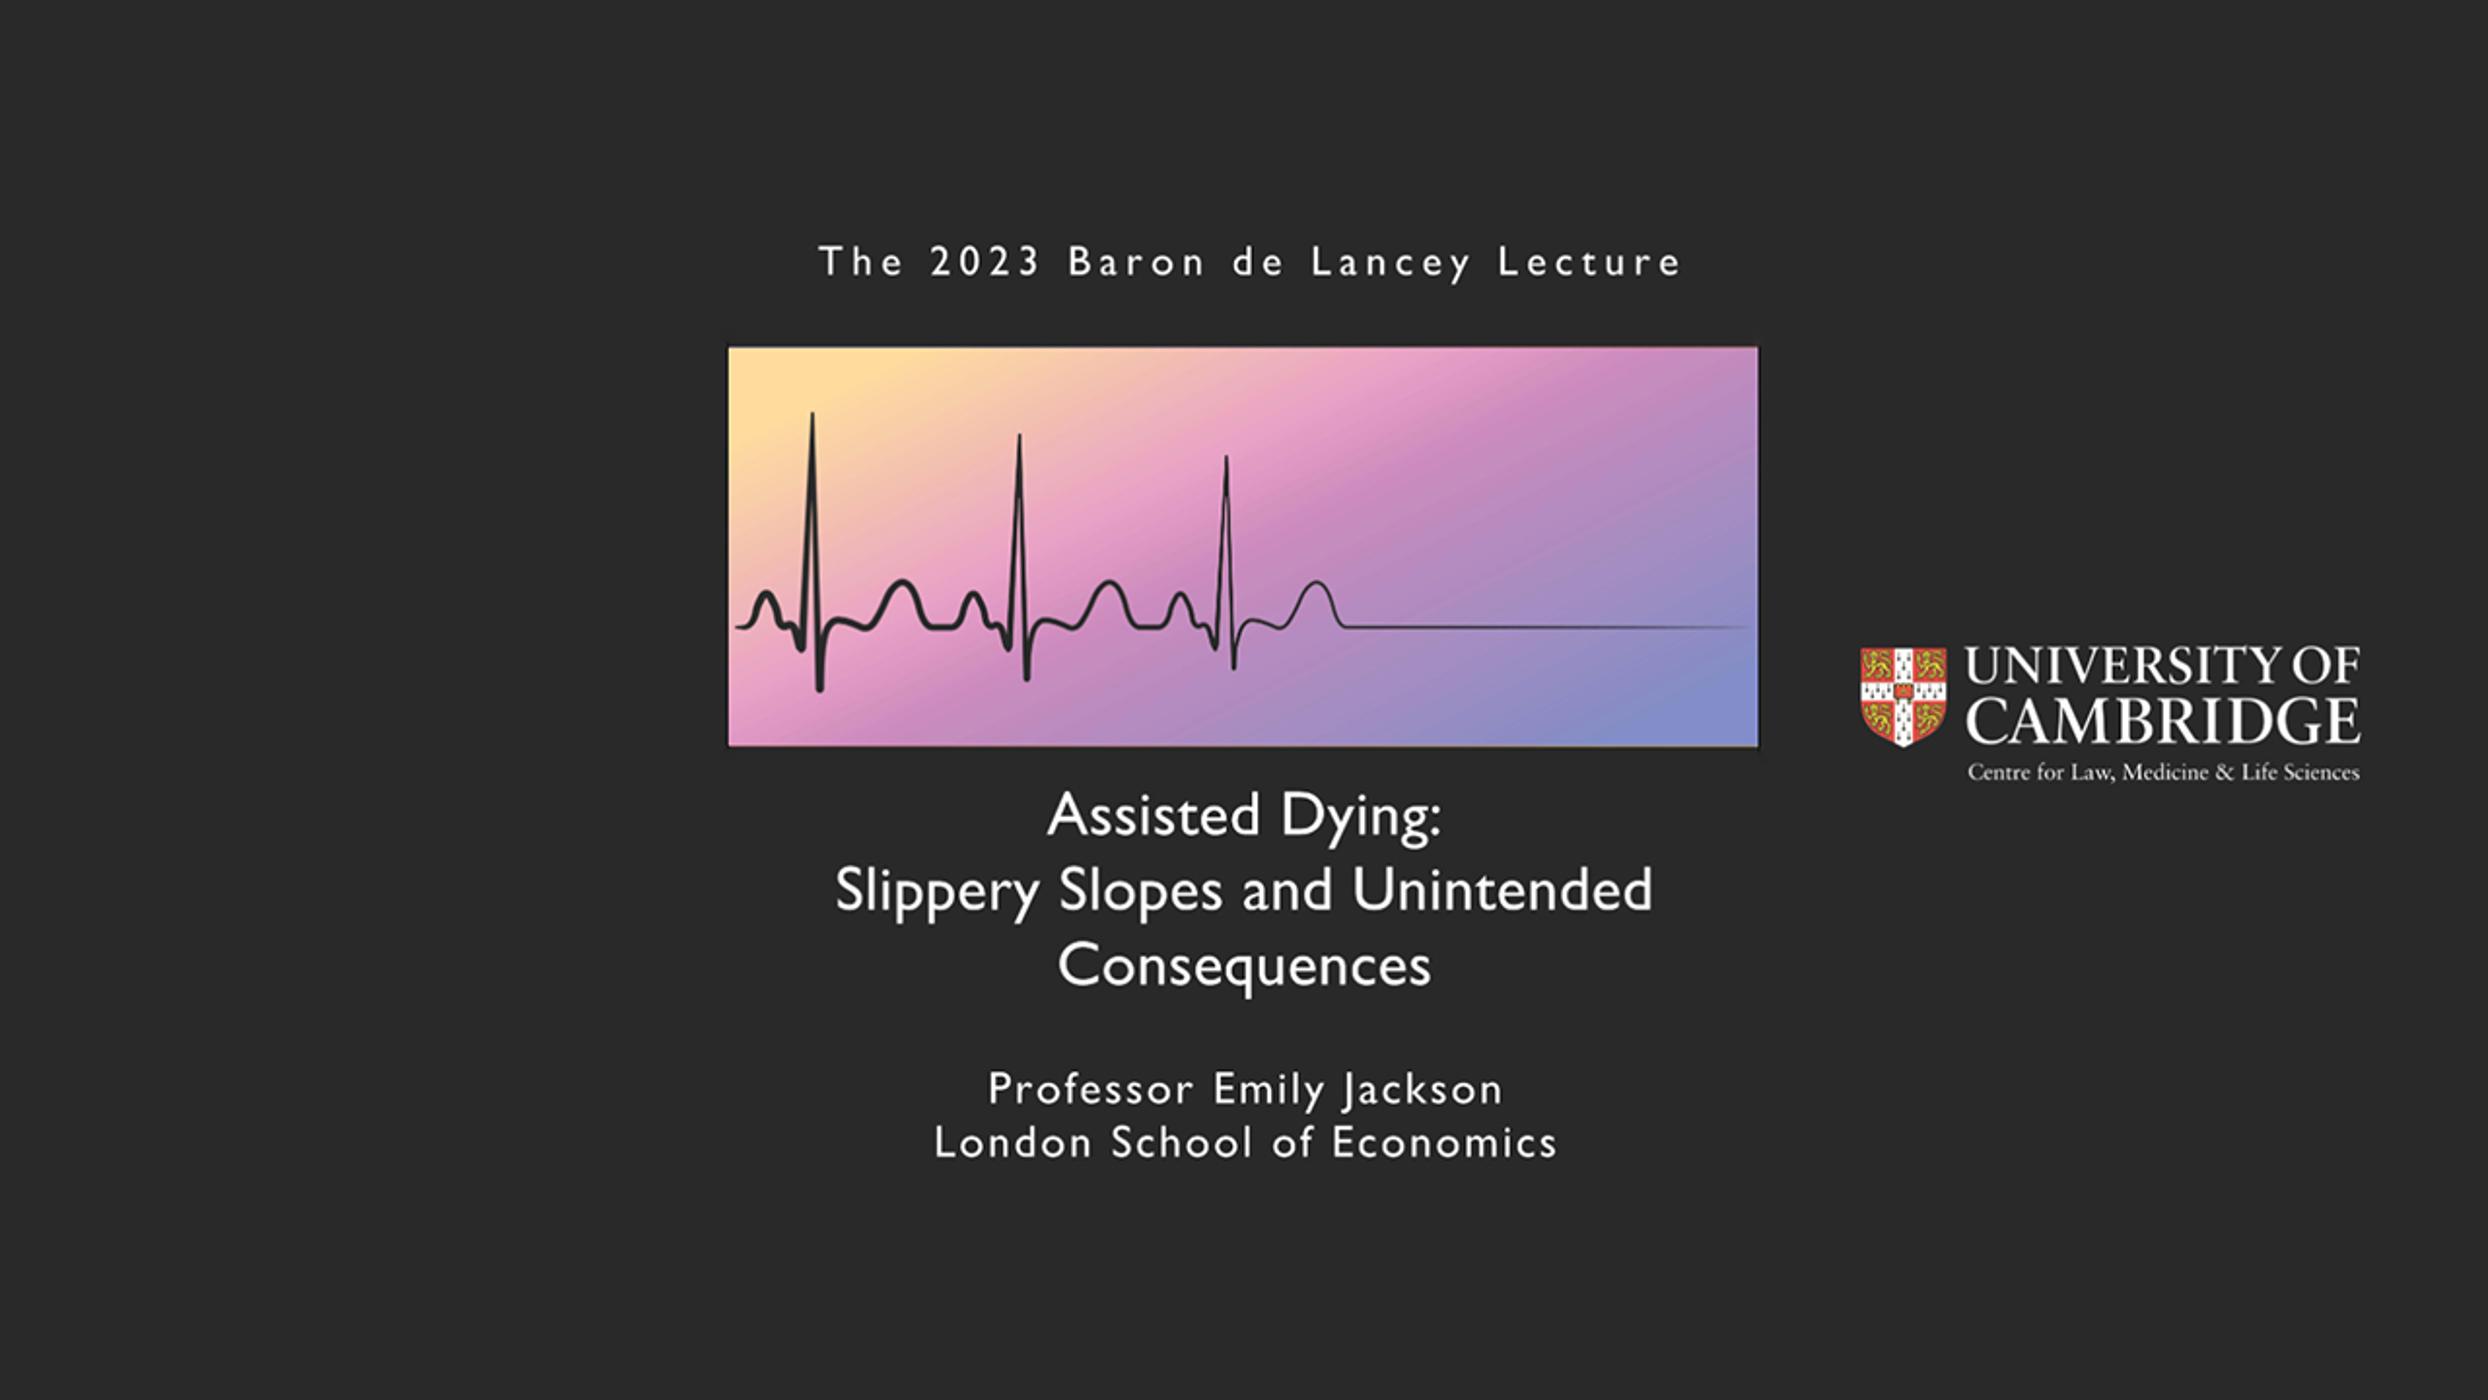 ’Assisted Dying: Slippery Slopes and Unintended Consequences’: The Baron de Lancey Lecture 2023